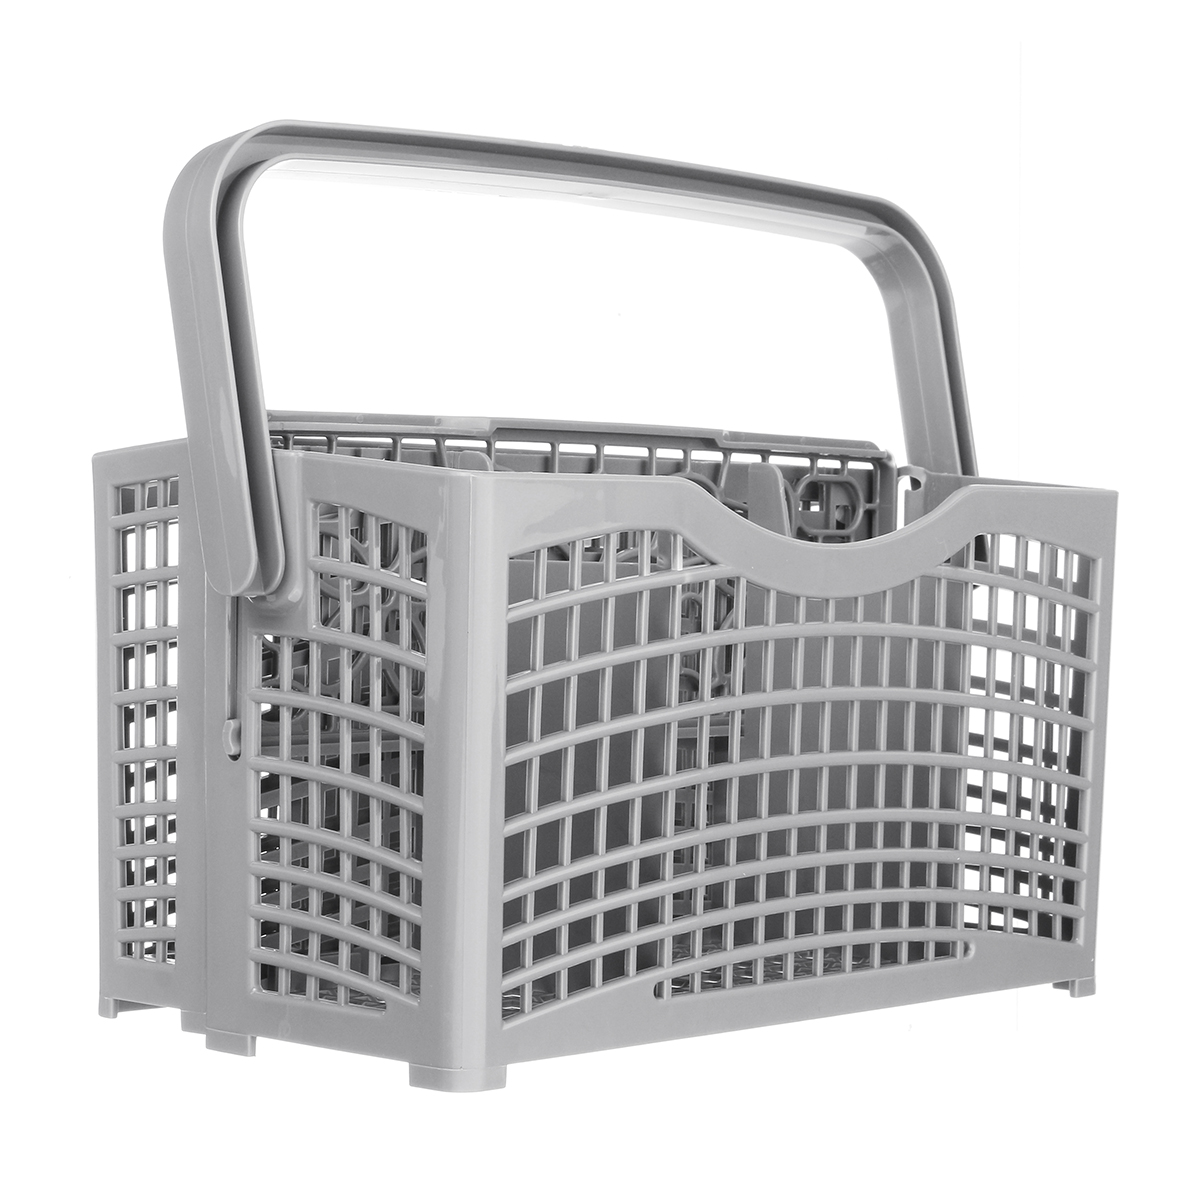 2-In-1-Universal-Dish-Washer-Cutlery-Basket-for-Maytag-Whirpool-LG-Samsung-1579731-9